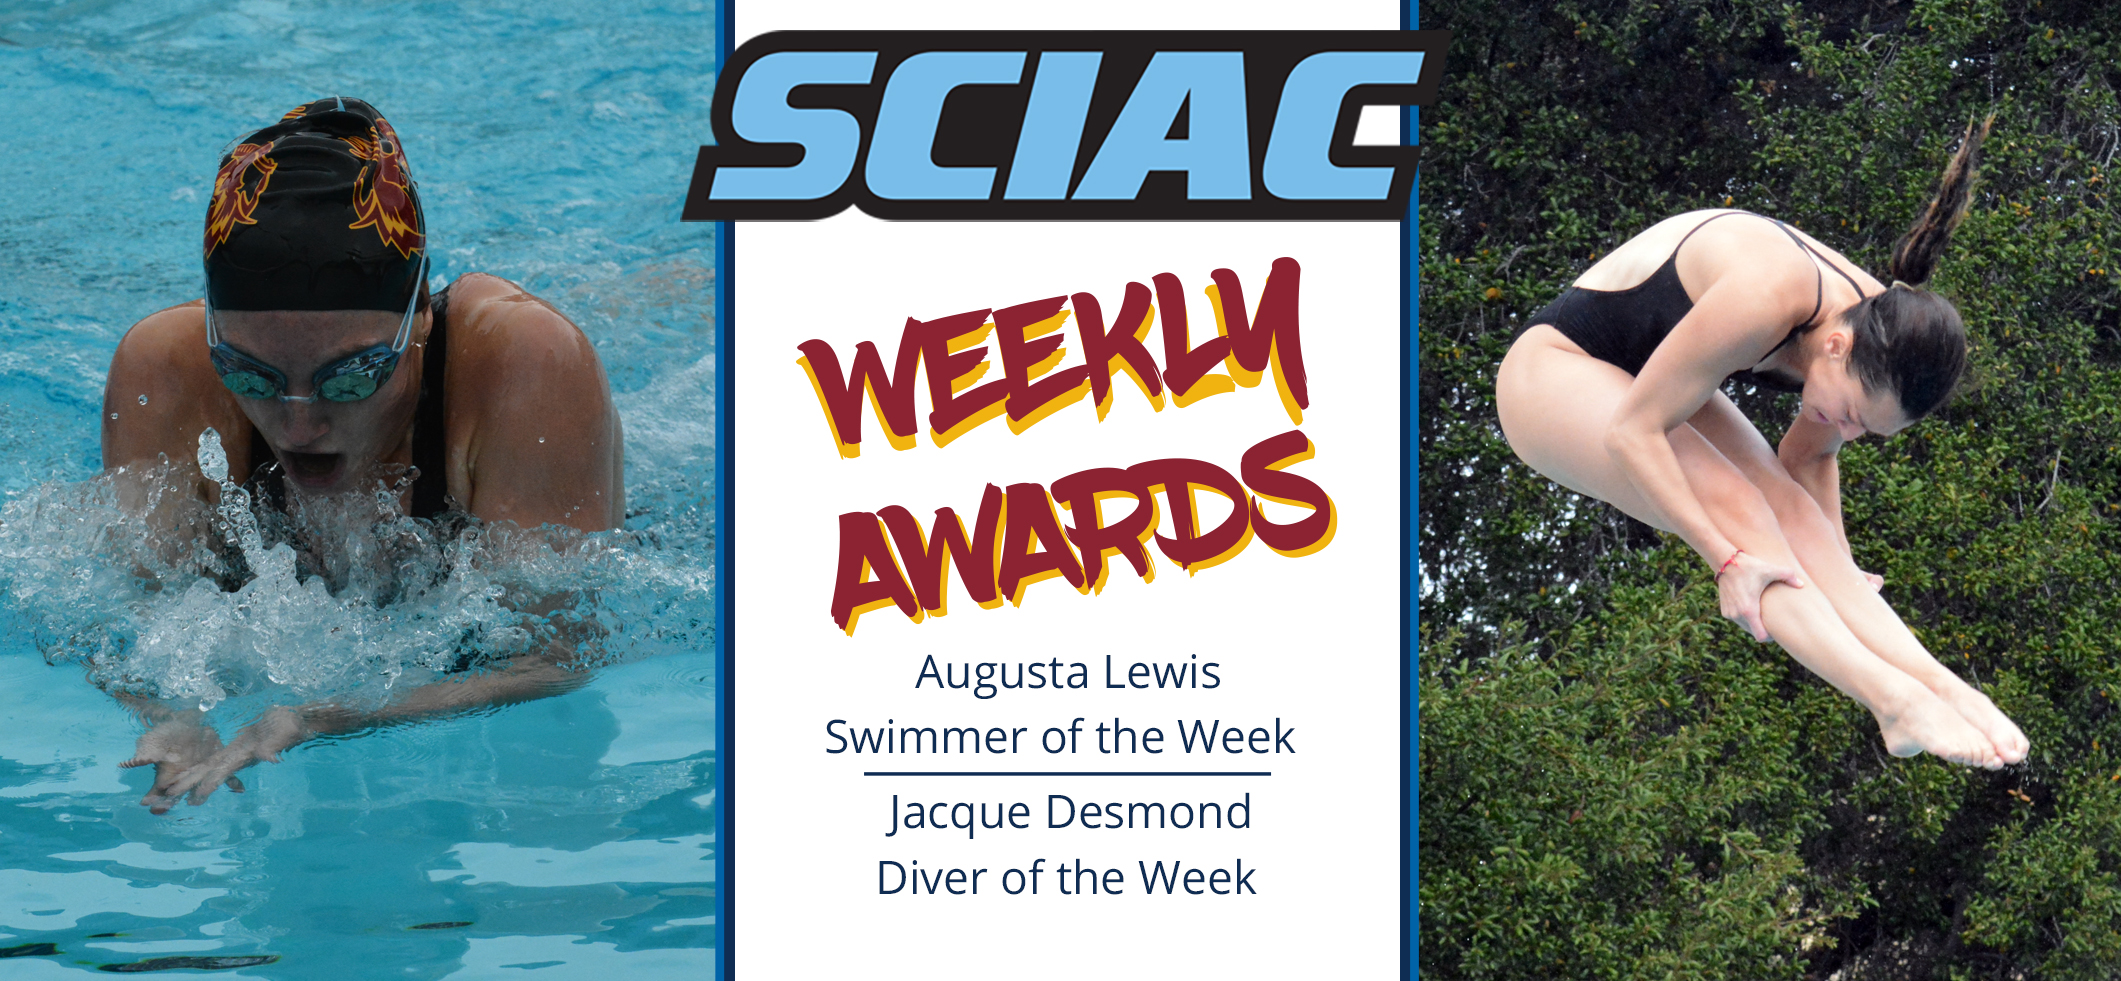 Augusta Lewis (left) and Jacque Desmond (right) earned SCIAC weekly honors